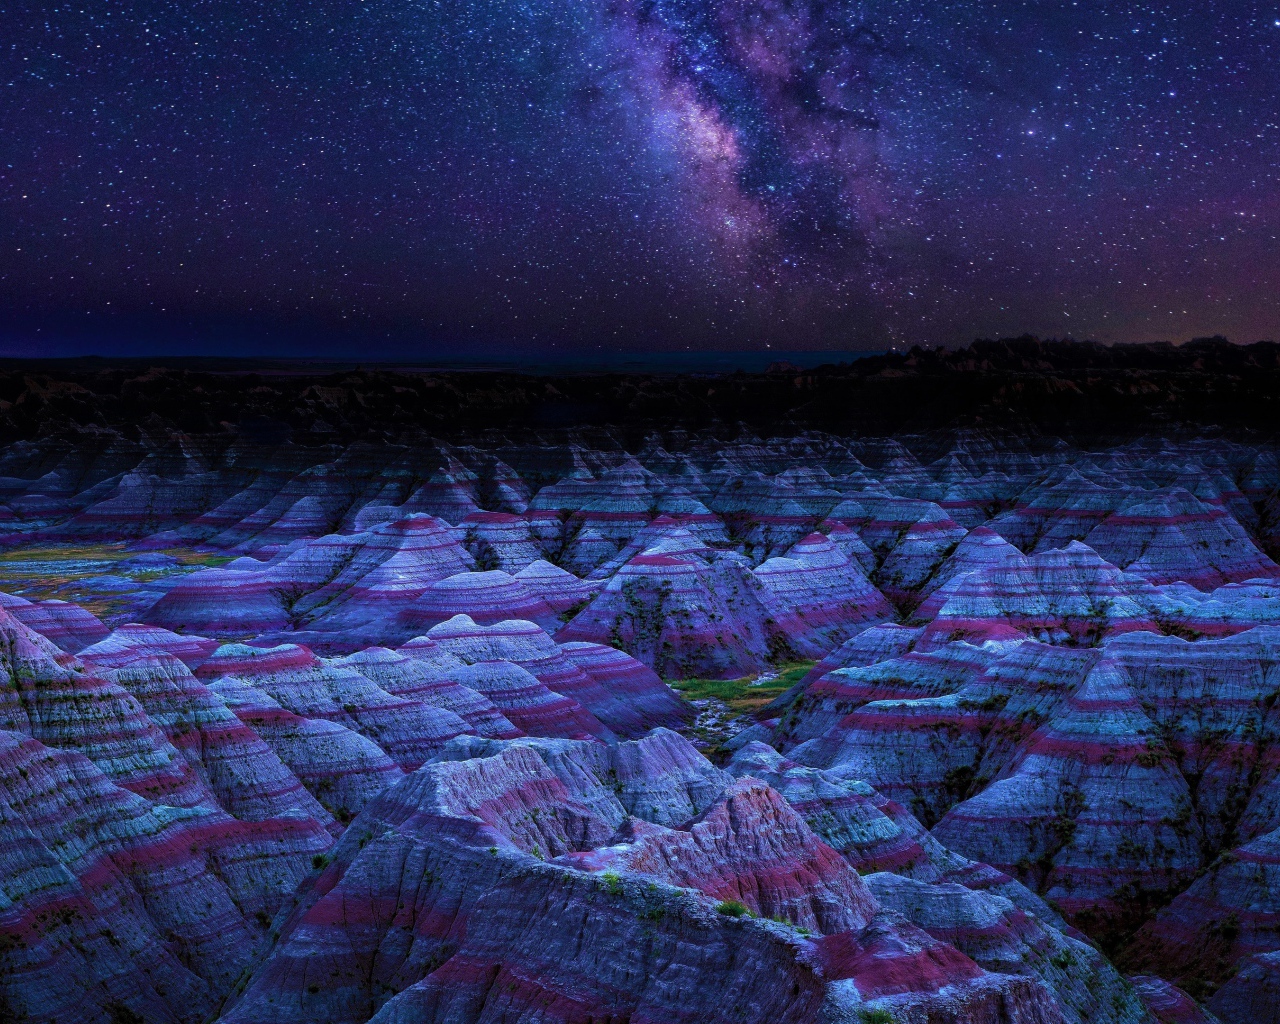 Milky Way over the rocks in the National Park of the Blacklands, USA